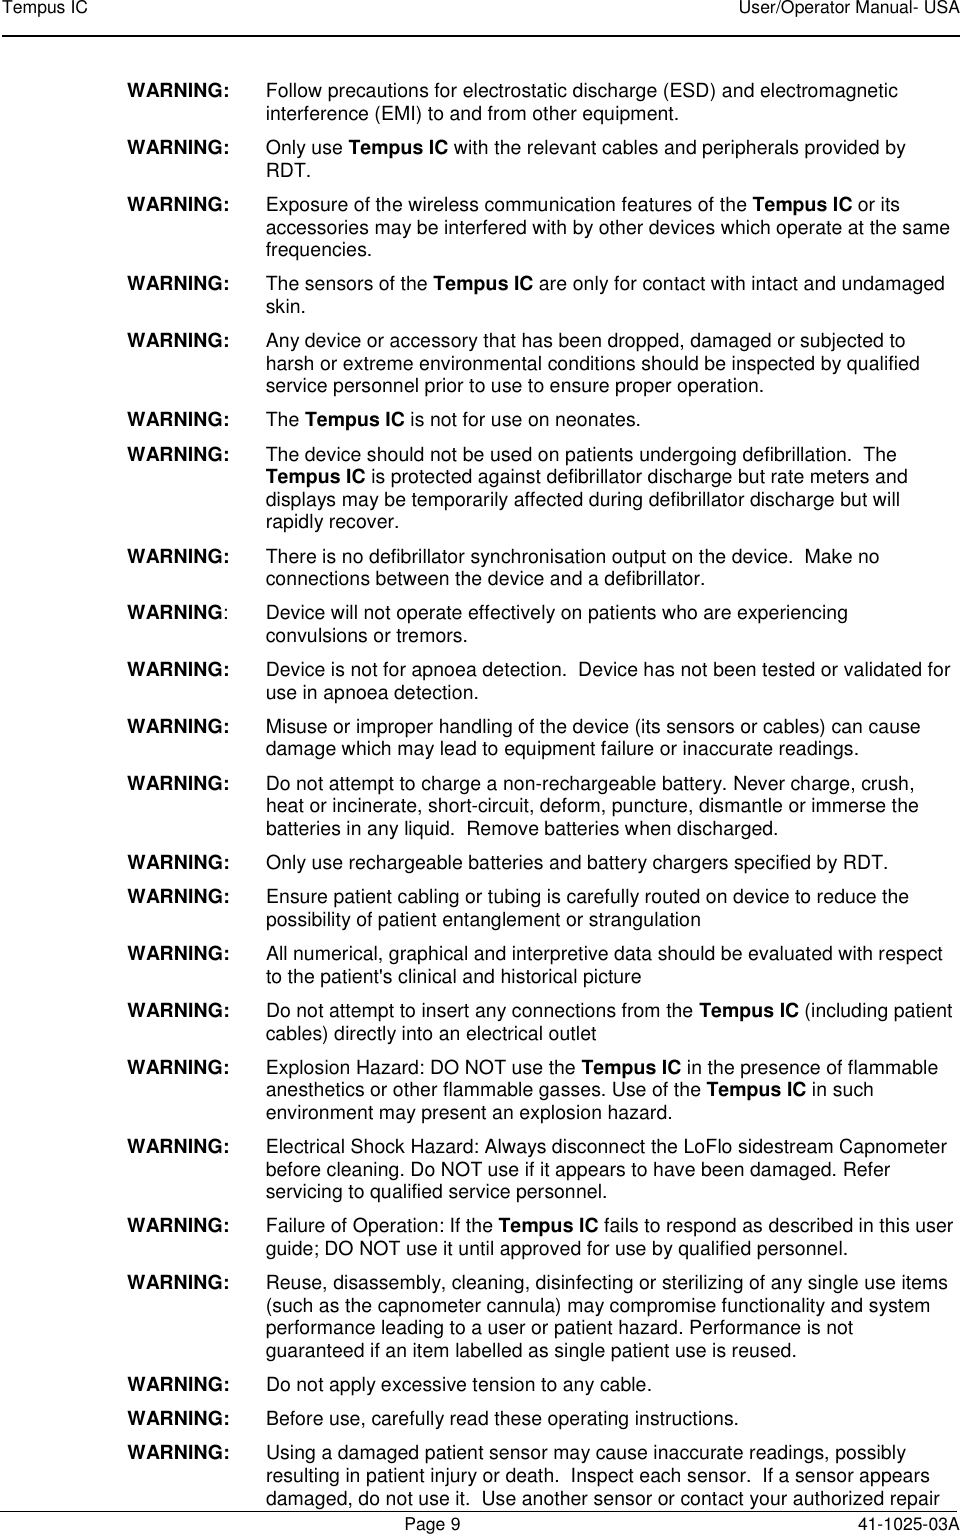 Tempus IC    User/Operator Manual- USA        Page 9  41-1025-03A WARNING:  Follow precautions for electrostatic discharge (ESD) and electromagnetic interference (EMI) to and from other equipment. WARNING:    Only use Tempus IC with the relevant cables and peripherals provided by RDT.  WARNING:   Exposure of the wireless communication features of the Tempus IC or its accessories may be interfered with by other devices which operate at the same frequencies. WARNING:  The sensors of the Tempus IC are only for contact with intact and undamaged skin. WARNING:  Any device or accessory that has been dropped, damaged or subjected to harsh or extreme environmental conditions should be inspected by qualified service personnel prior to use to ensure proper operation. WARNING:  The Tempus IC is not for use on neonates. WARNING:  The device should not be used on patients undergoing defibrillation.  The Tempus IC is protected against defibrillator discharge but rate meters and displays may be temporarily affected during defibrillator discharge but will rapidly recover. WARNING:  There is no defibrillator synchronisation output on the device.  Make no connections between the device and a defibrillator.   WARNING:  Device will not operate effectively on patients who are experiencing convulsions or tremors. WARNING:  Device is not for apnoea detection.  Device has not been tested or validated for use in apnoea detection. WARNING:  Misuse or improper handling of the device (its sensors or cables) can cause damage which may lead to equipment failure or inaccurate readings. WARNING:  Do not attempt to charge a non-rechargeable battery. Never charge, crush, heat or incinerate, short-circuit, deform, puncture, dismantle or immerse the batteries in any liquid.  Remove batteries when discharged. WARNING:  Only use rechargeable batteries and battery chargers specified by RDT. WARNING:   Ensure patient cabling or tubing is carefully routed on device to reduce the possibility of patient entanglement or strangulation WARNING:   All numerical, graphical and interpretive data should be evaluated with respect to the patient&apos;s clinical and historical picture  WARNING:   Do not attempt to insert any connections from the Tempus IC (including patient cables) directly into an electrical outlet  WARNING:  Explosion Hazard: DO NOT use the Tempus IC in the presence of flammable anesthetics or other flammable gasses. Use of the Tempus IC in such environment may present an explosion hazard. WARNING:  Electrical Shock Hazard: Always disconnect the LoFlo sidestream Capnometer before cleaning. Do NOT use if it appears to have been damaged. Refer servicing to qualified service personnel. WARNING:  Failure of Operation: If the Tempus IC fails to respond as described in this user guide; DO NOT use it until approved for use by qualified personnel. WARNING:  Reuse, disassembly, cleaning, disinfecting or sterilizing of any single use items (such as the capnometer cannula) may compromise functionality and system performance leading to a user or patient hazard. Performance is not guaranteed if an item labelled as single patient use is reused. WARNING:  Do not apply excessive tension to any cable. WARNING:  Before use, carefully read these operating instructions. WARNING:    Using a damaged patient sensor may cause inaccurate readings, possibly resulting in patient injury or death.  Inspect each sensor.  If a sensor appears damaged, do not use it.  Use another sensor or contact your authorized repair 